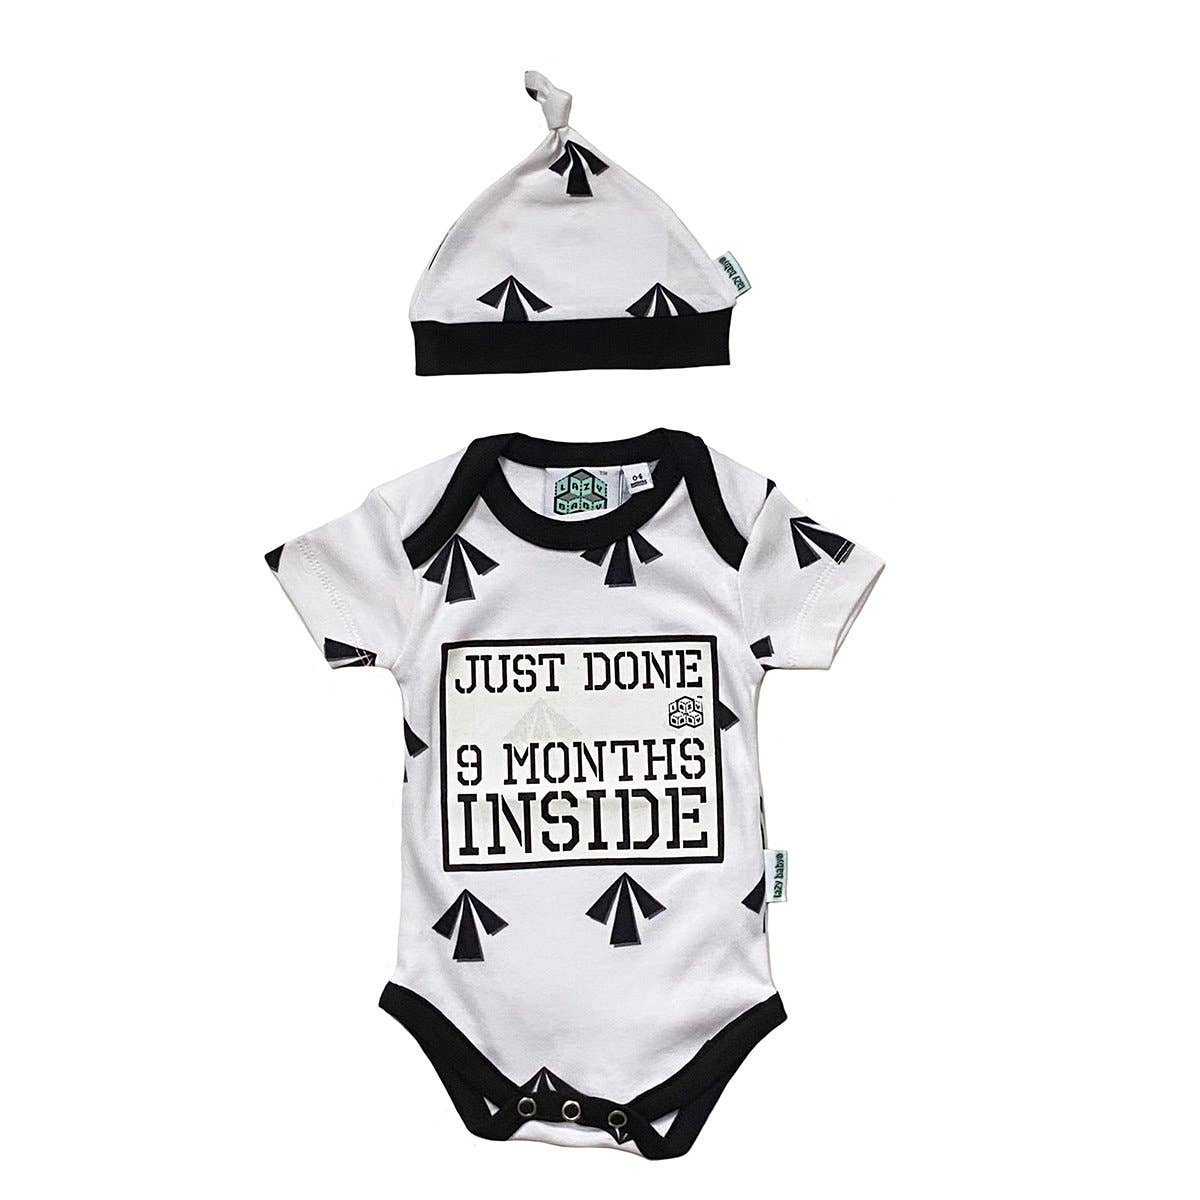 Funny Baby Vest Baby Shower Gift Boys Girls Bodysuit Grow Ive Just Done 9 Months 